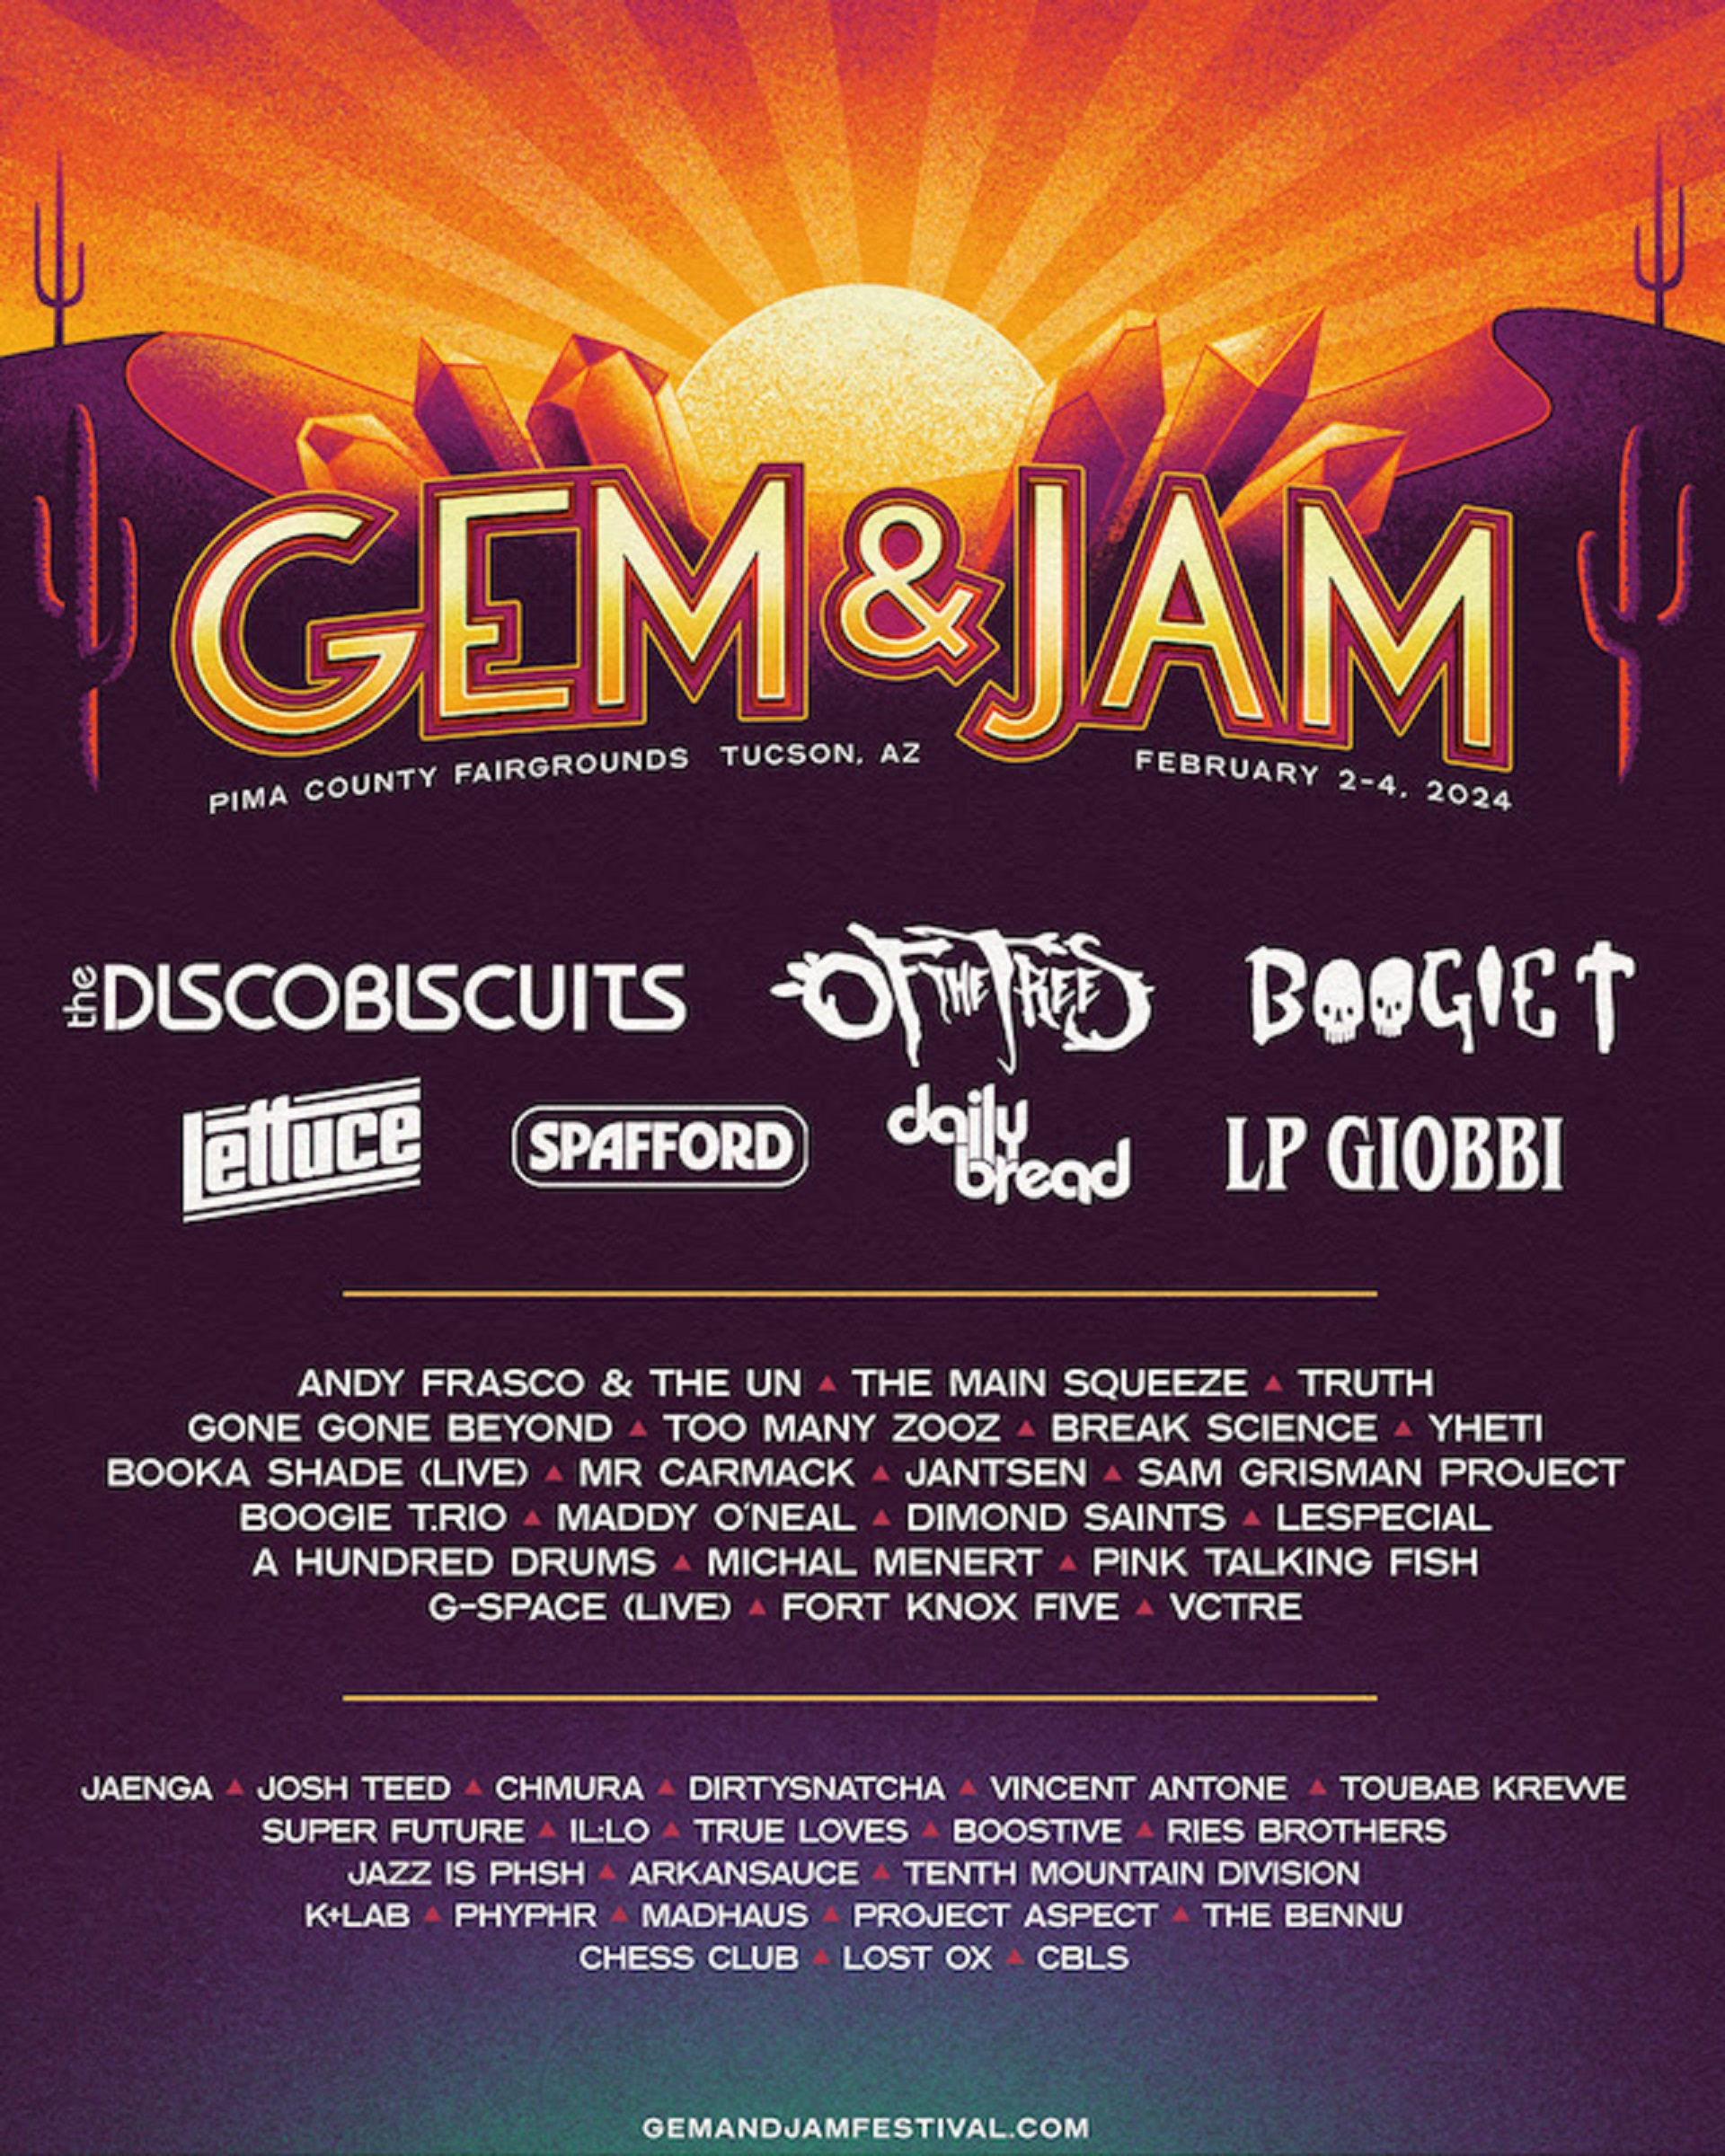 Gem & Jam unveils 2024 lineup: The Disco Biscuits, Of The Trees, Boogie T, Lettuce, Spafford, LP Giobbi & Daily Bread